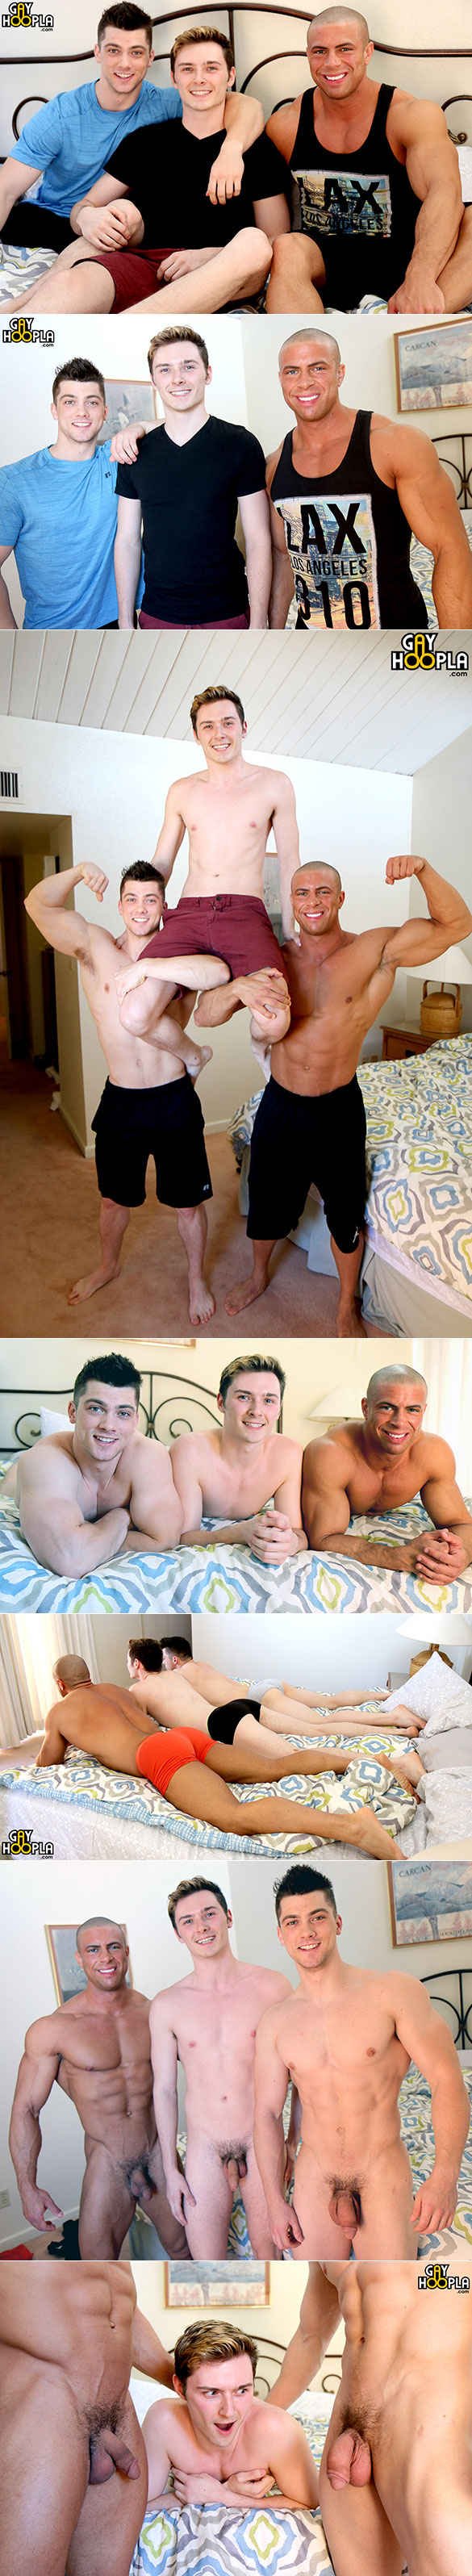 GayHoopla: Collin Simpson, Sean Costin and Neal Peterson's hot threeway fuck